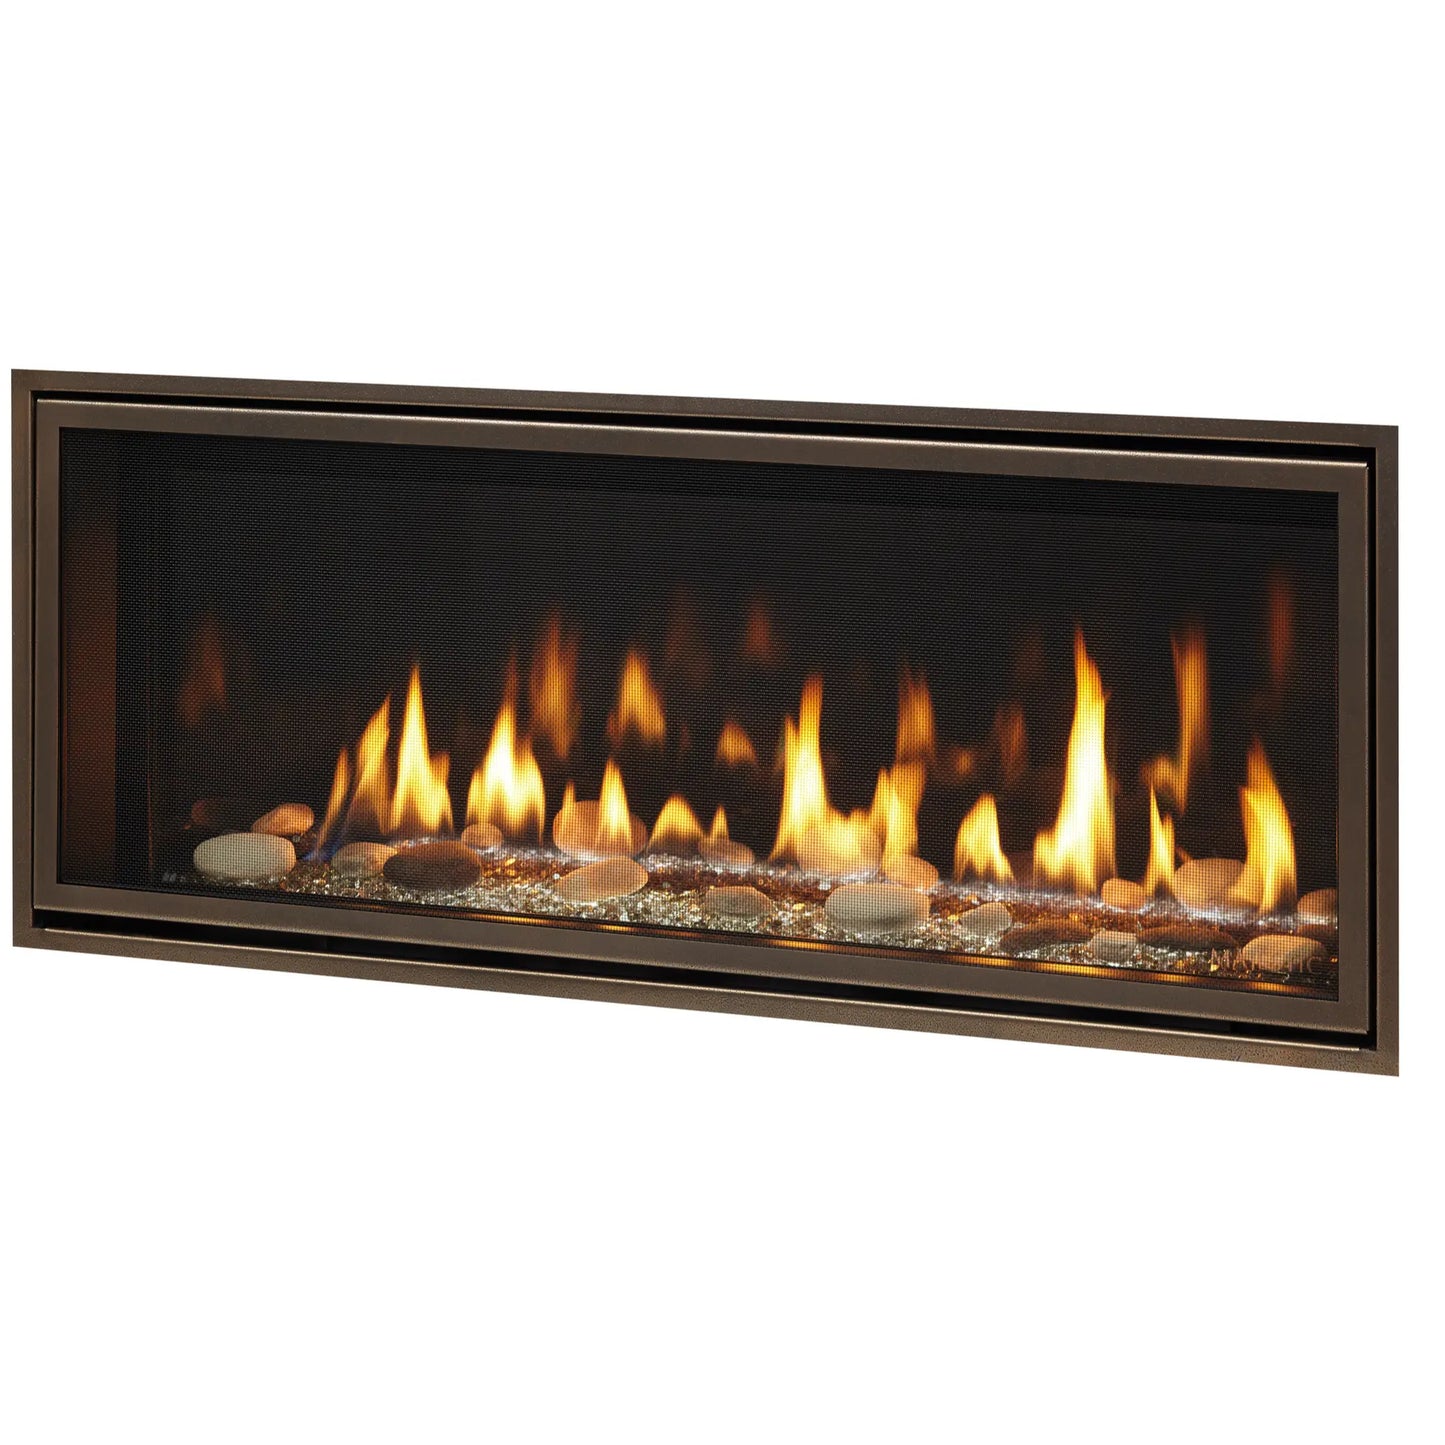 Majestic Echelon II 48" Direct Vent Gas Fireplace - with IntelliFire Touchscreen Remote